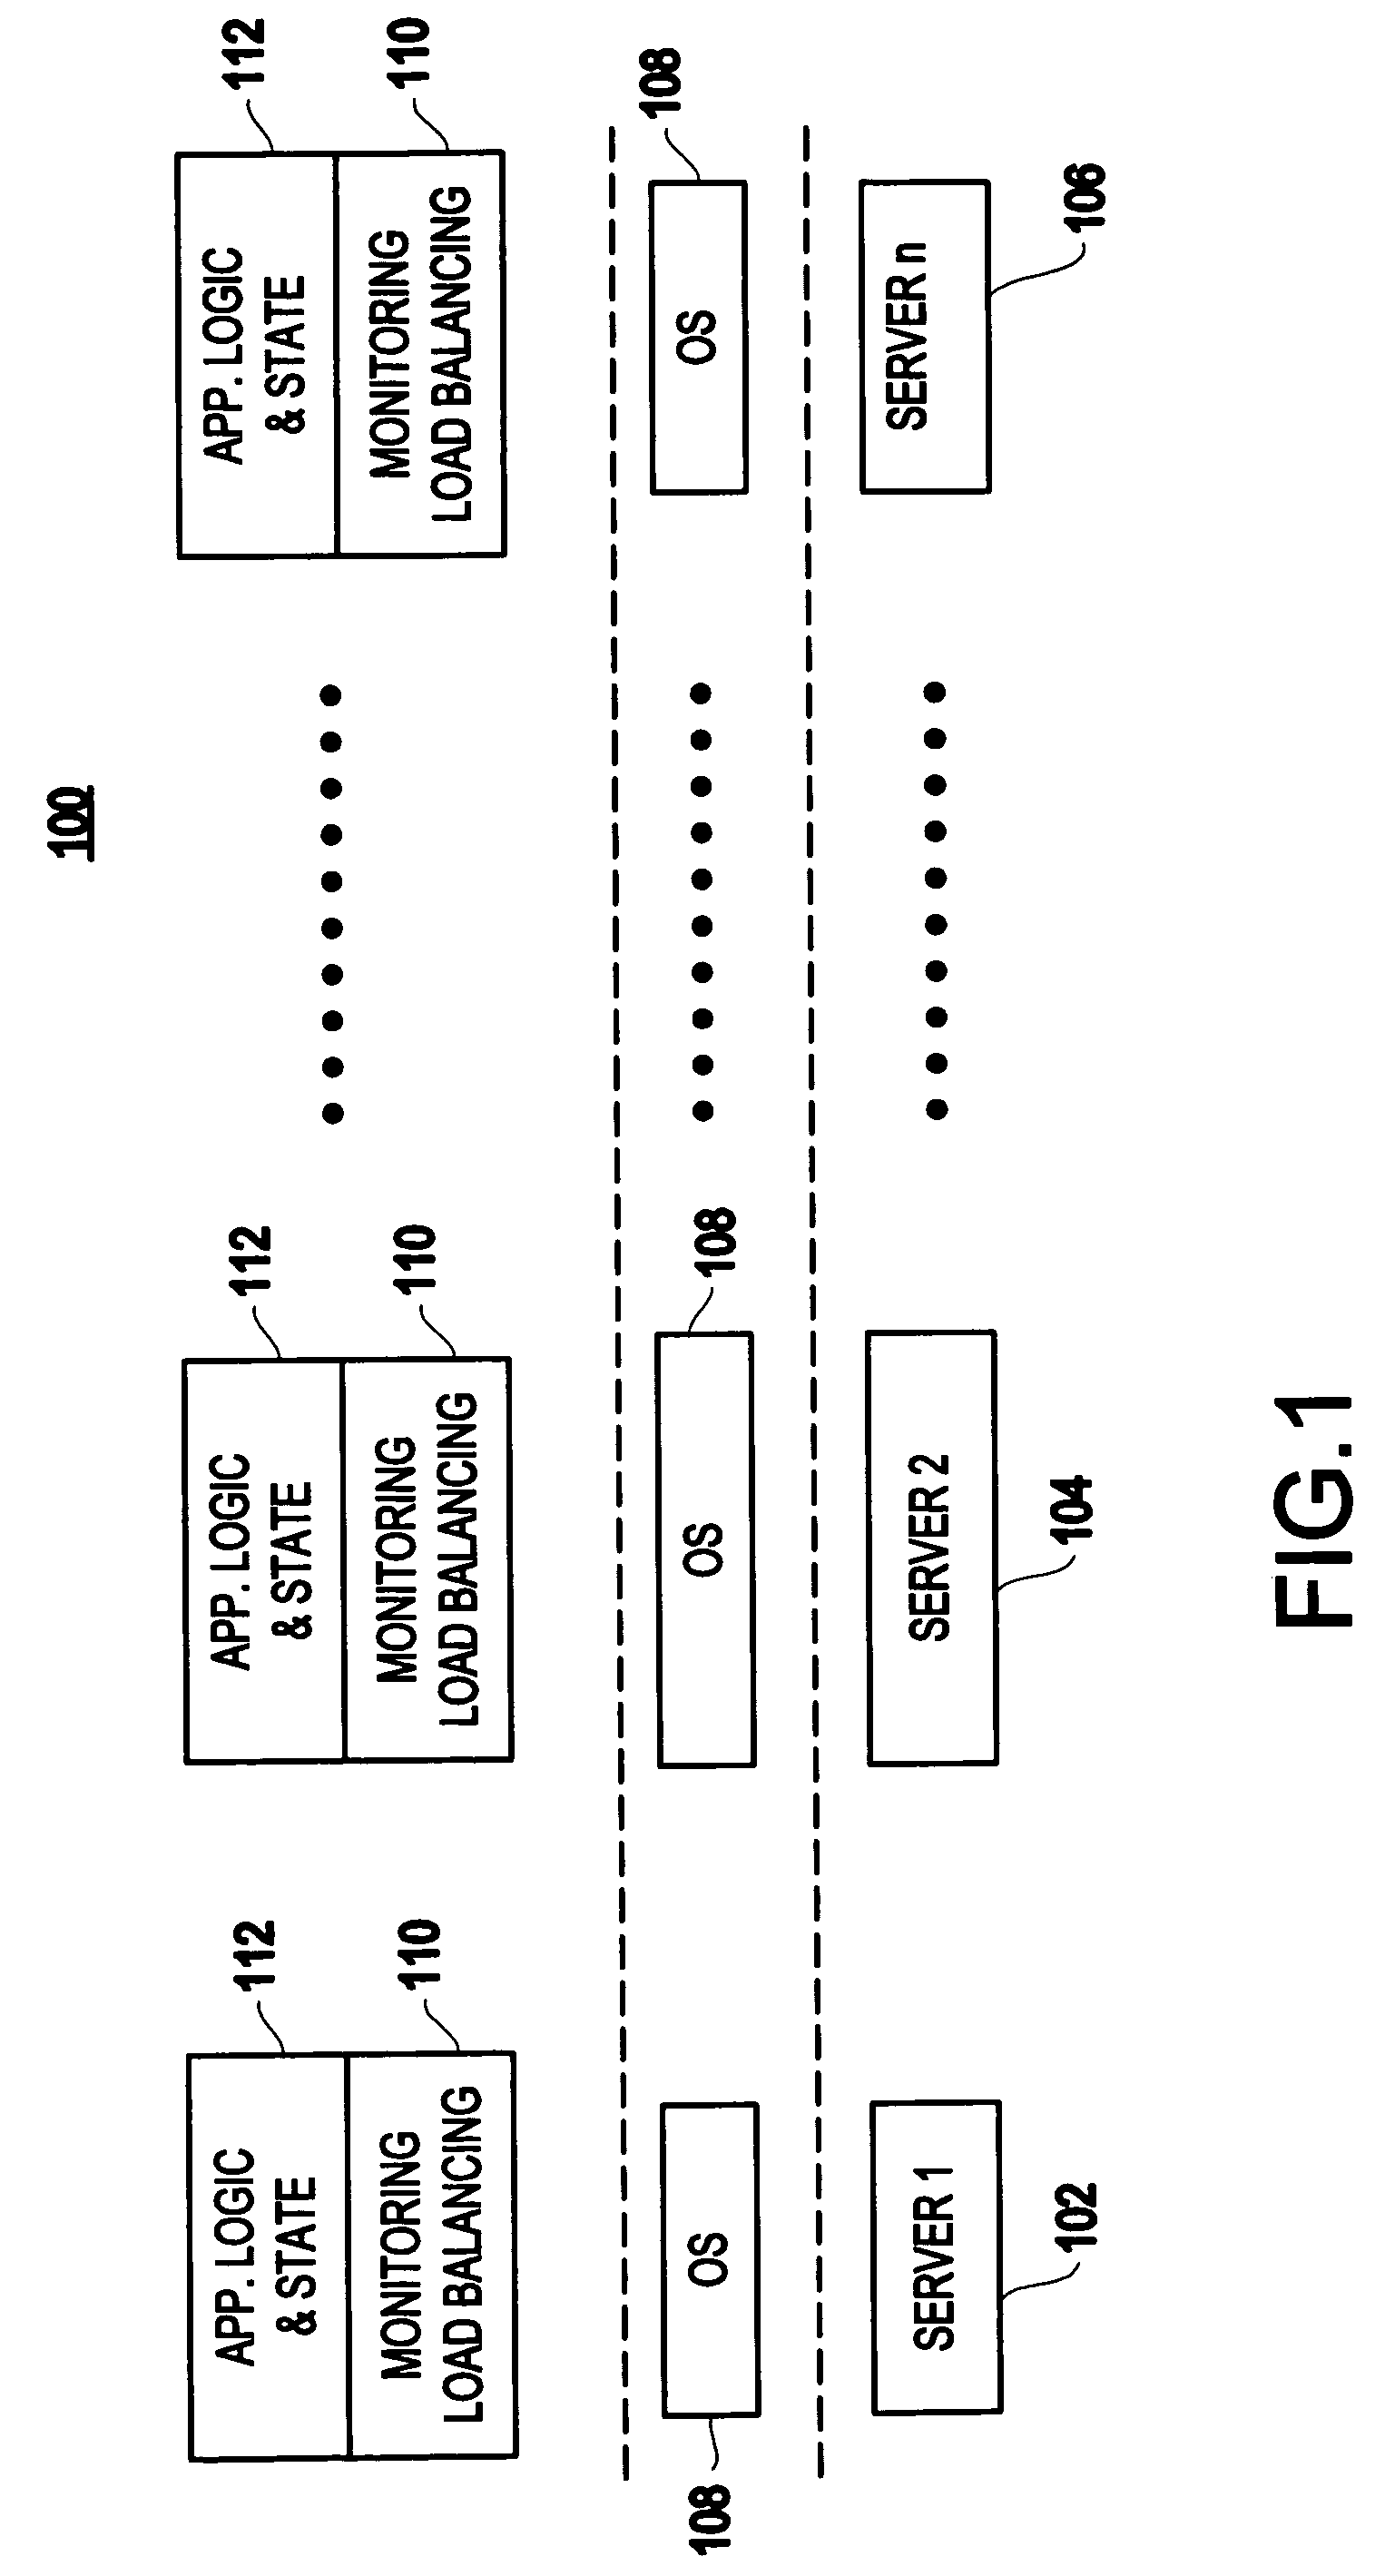 Method and apparatus for using virtual machine technology for managing parallel communicating applications